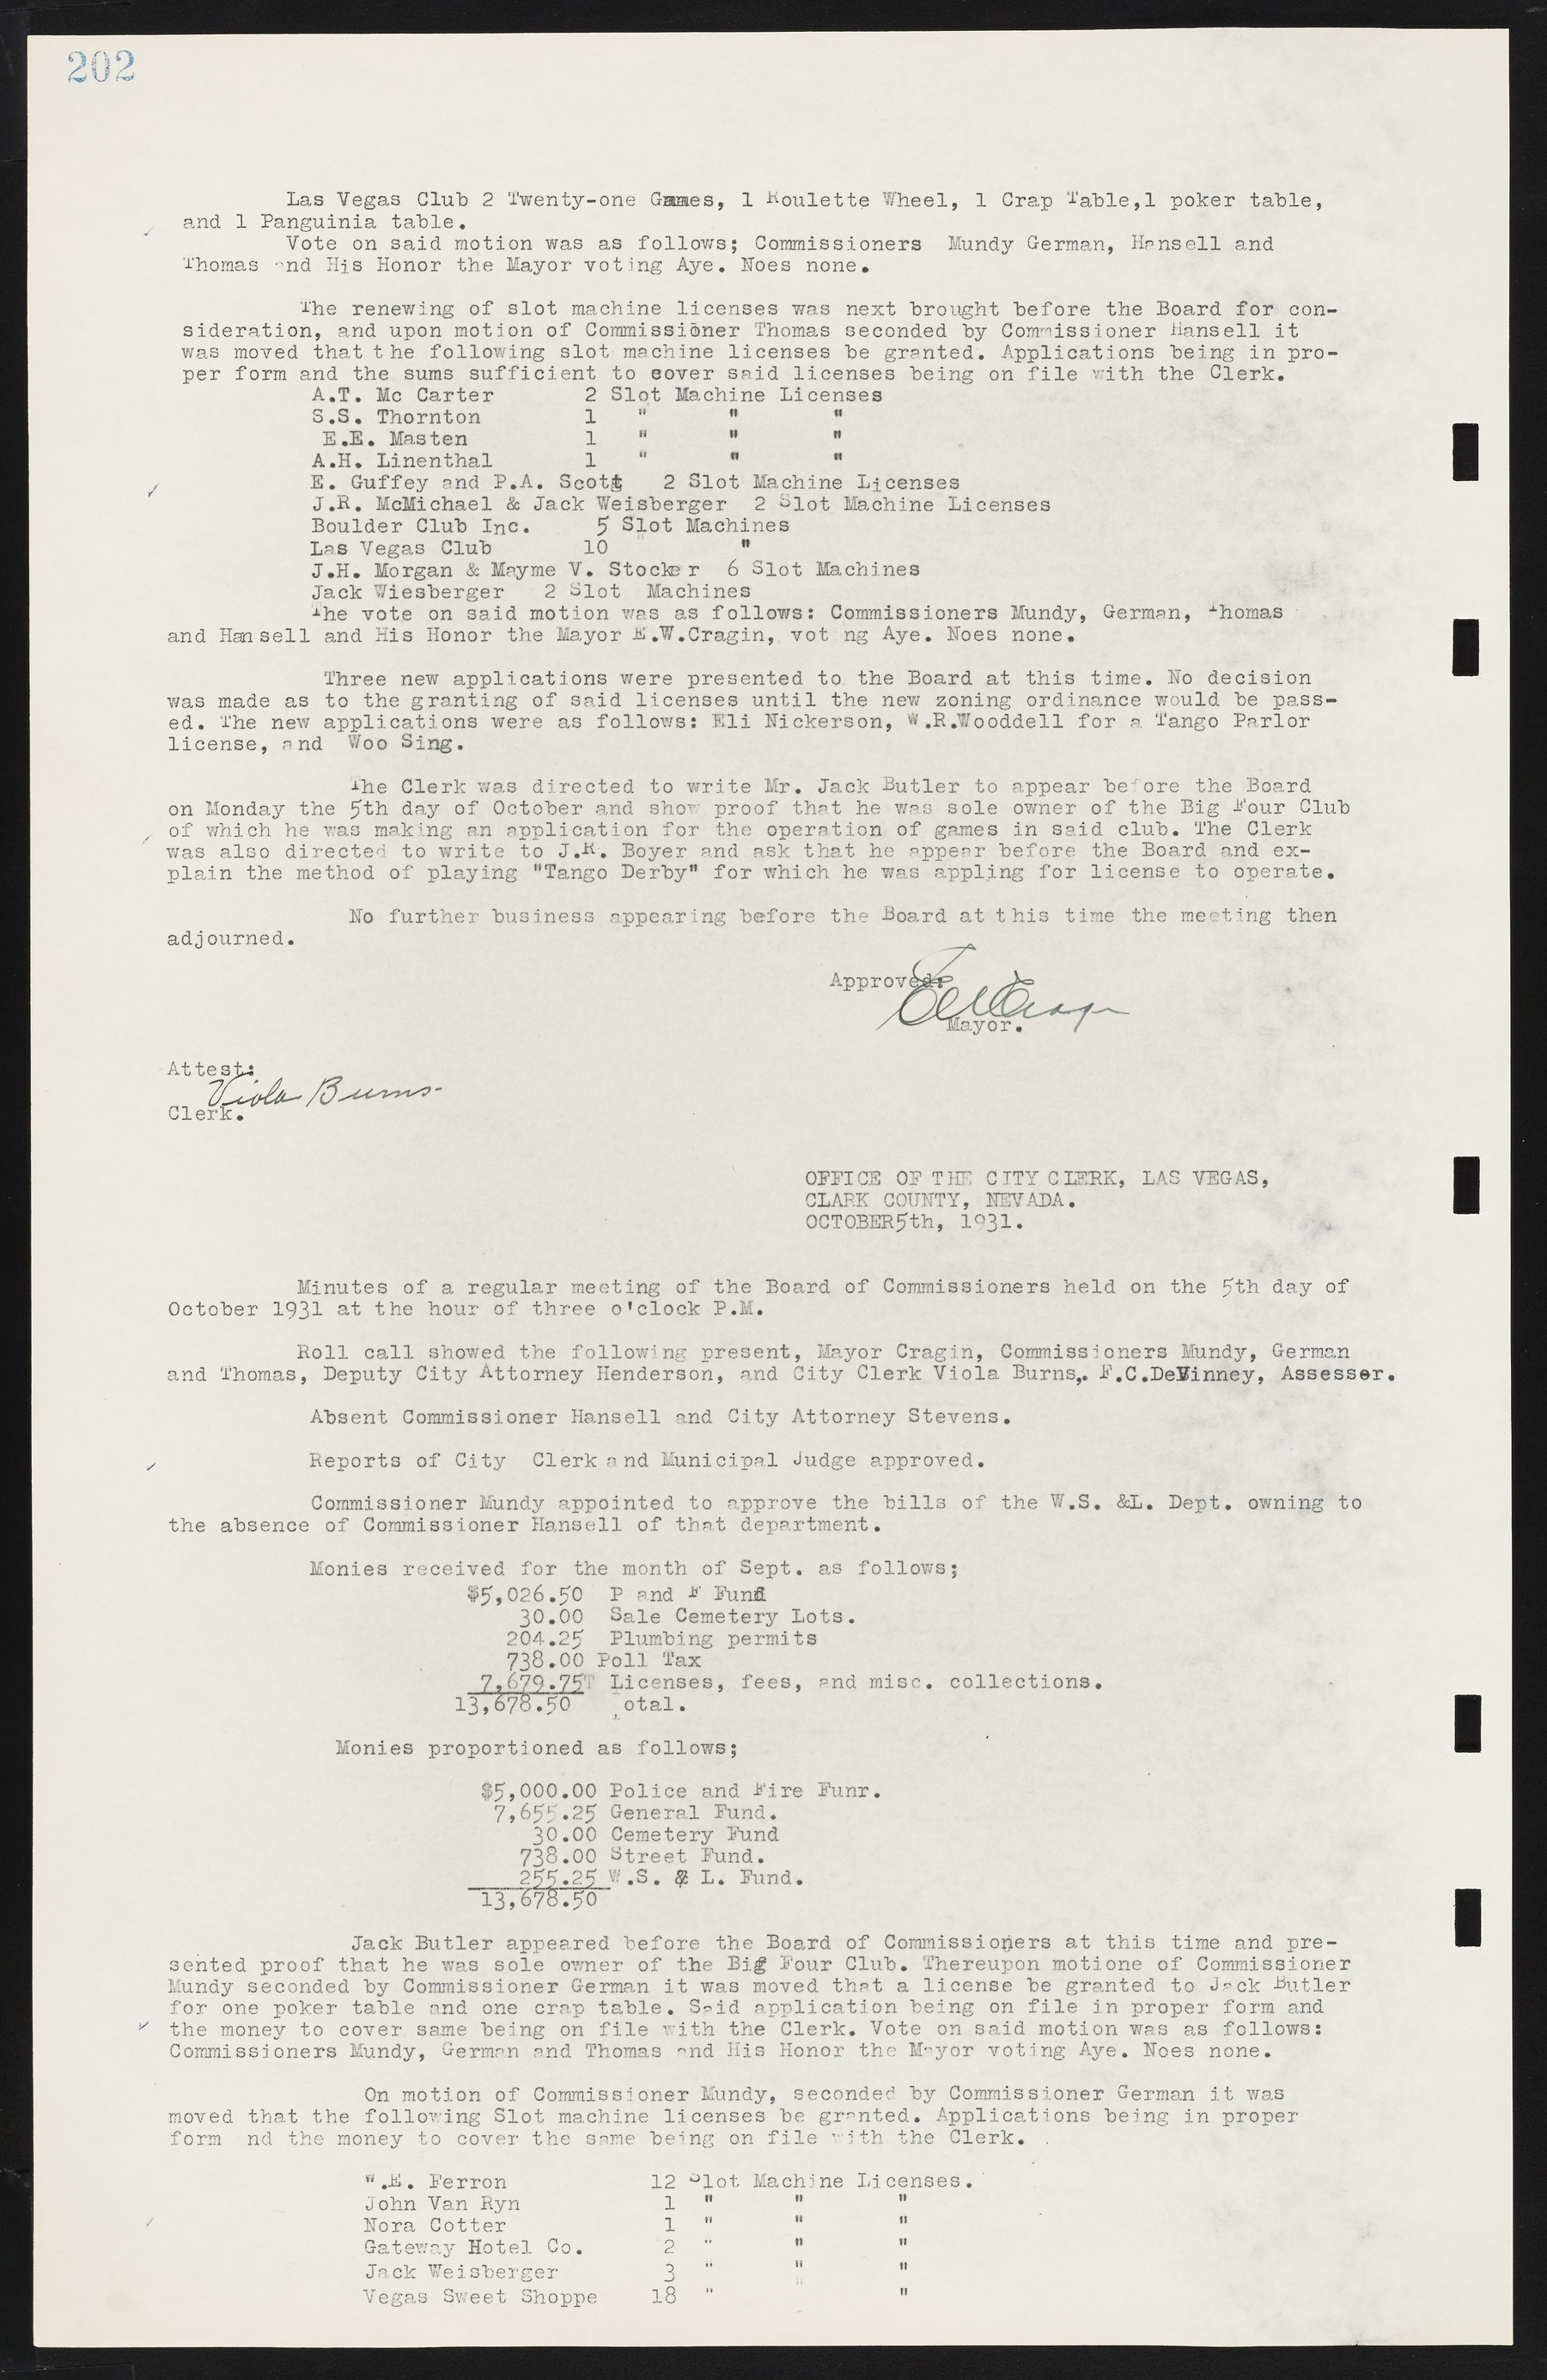 Las Vegas City Commission Minutes, May 14, 1929 to February 11, 1937, lvc000003-208